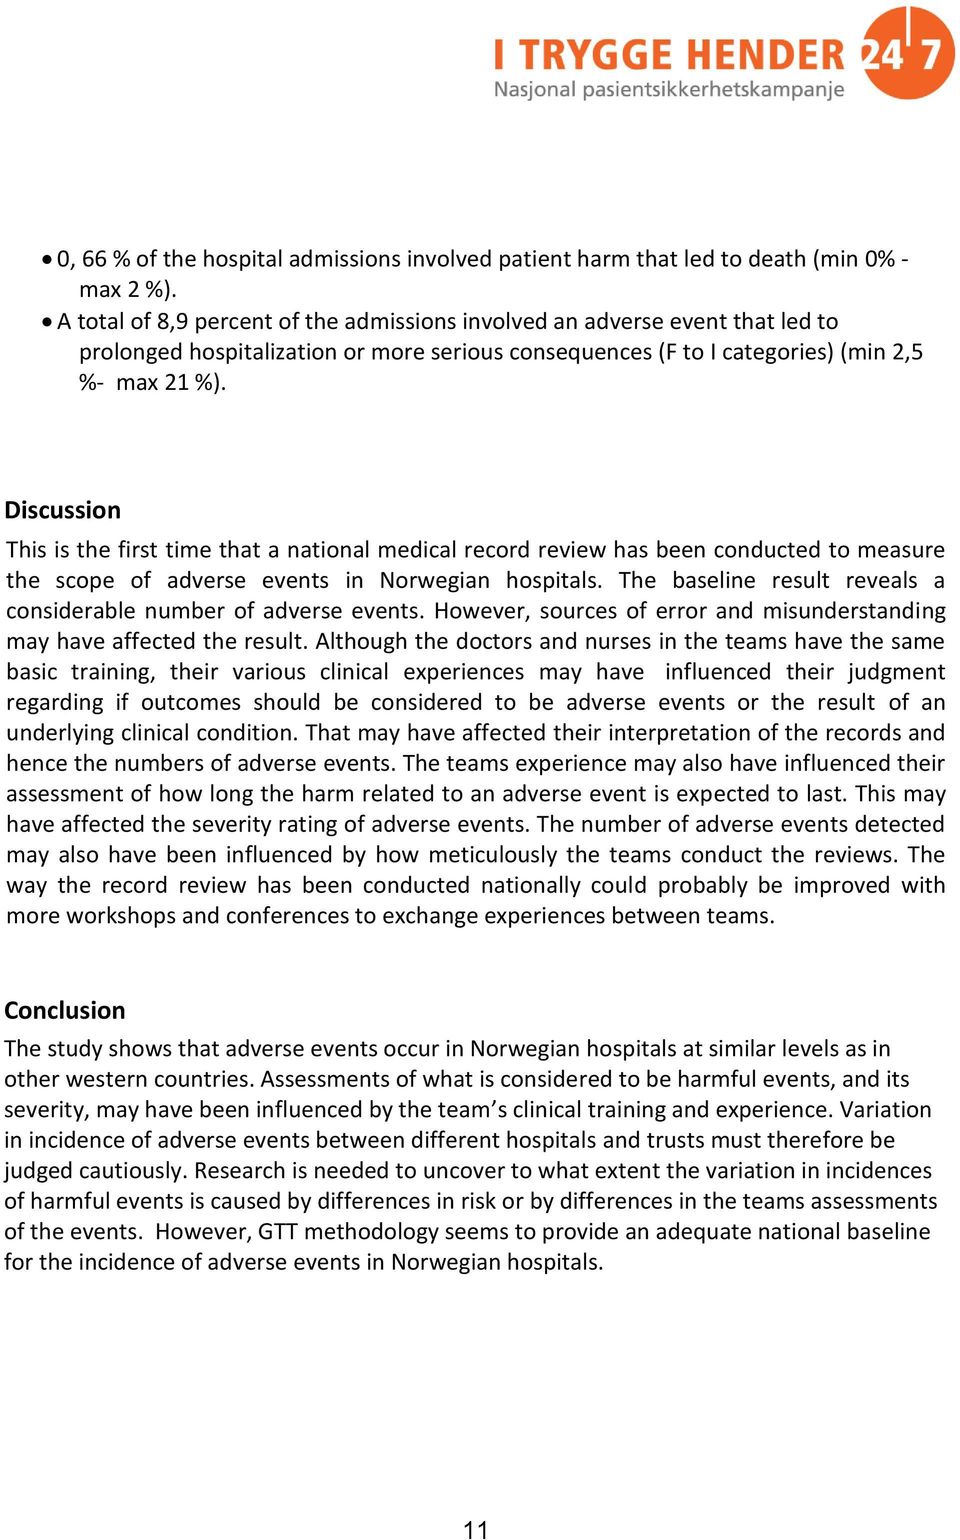 Discussion This is the first time that a national medical record review has been conducted to measure the scope of adverse events in Norwegian hospitals.